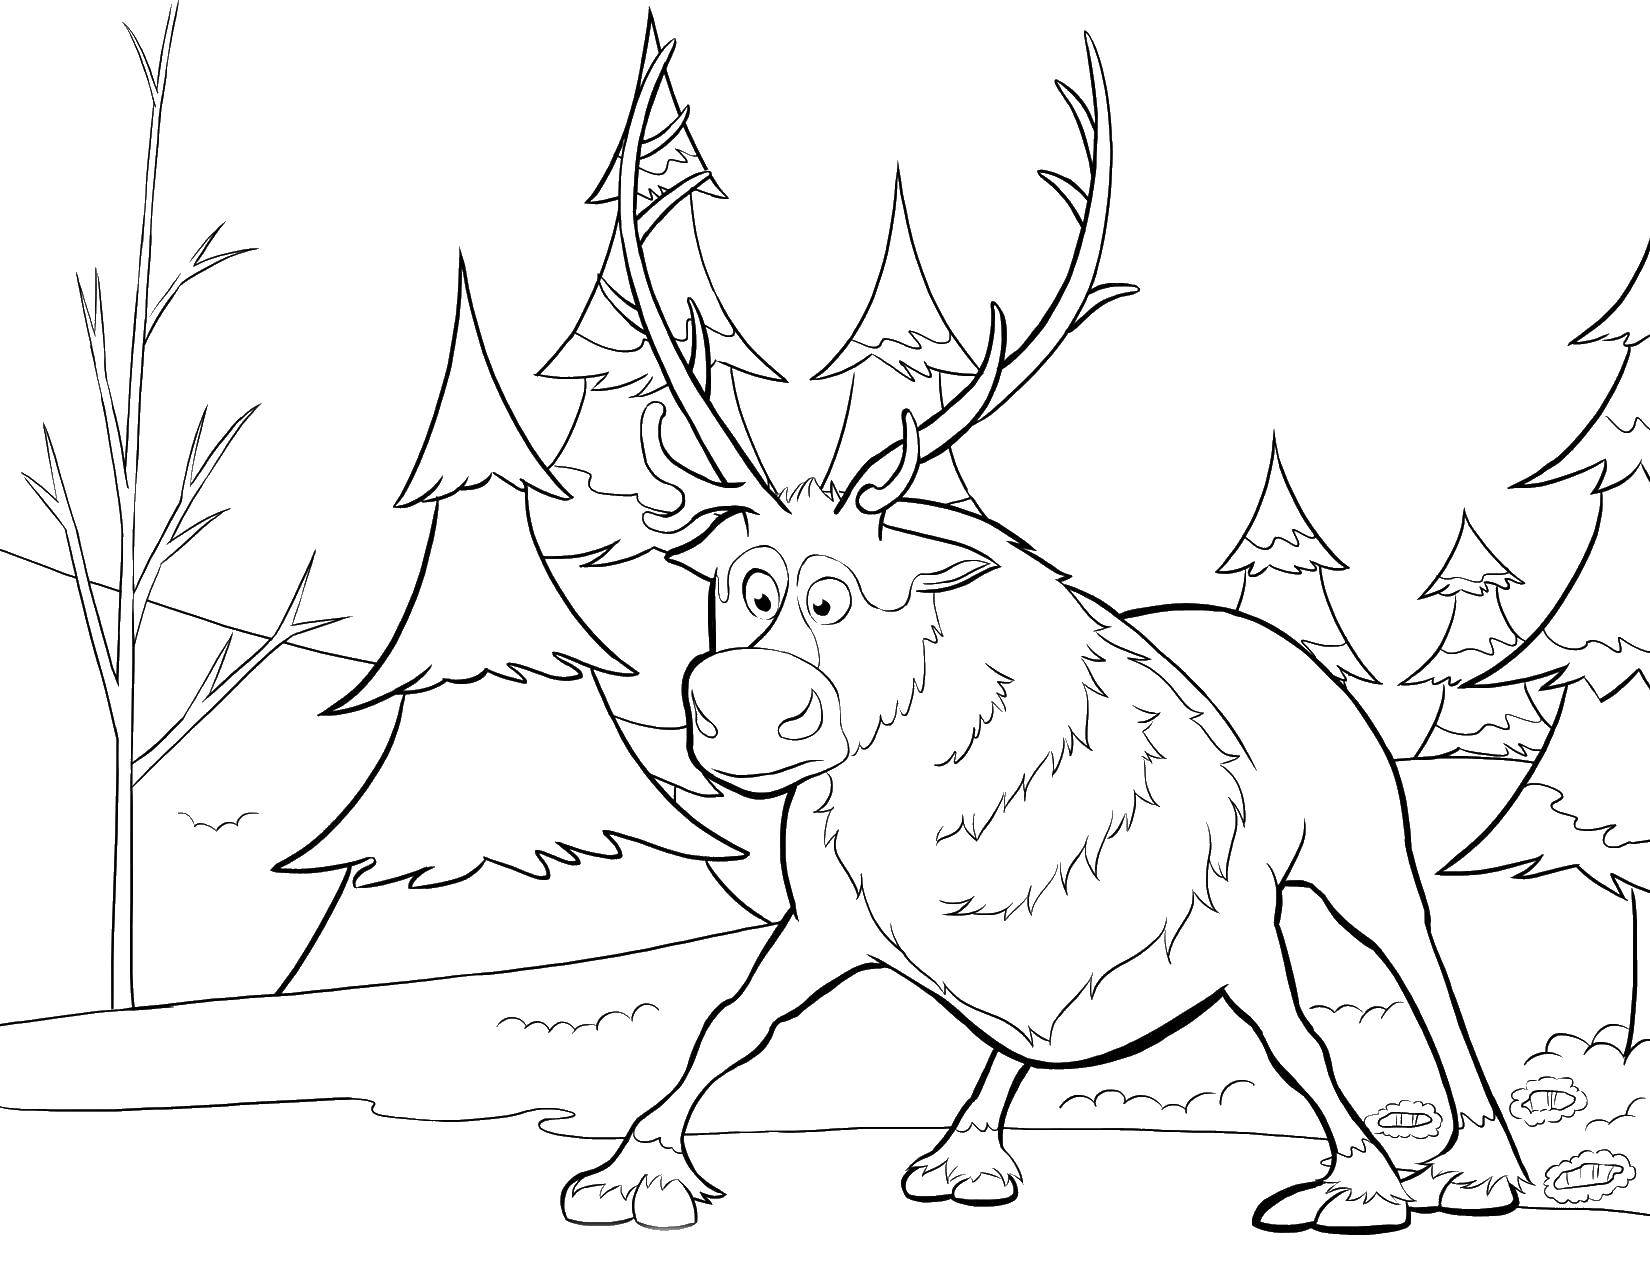 Coloring Deer on ice. Category Animals. Tags:  the deer.